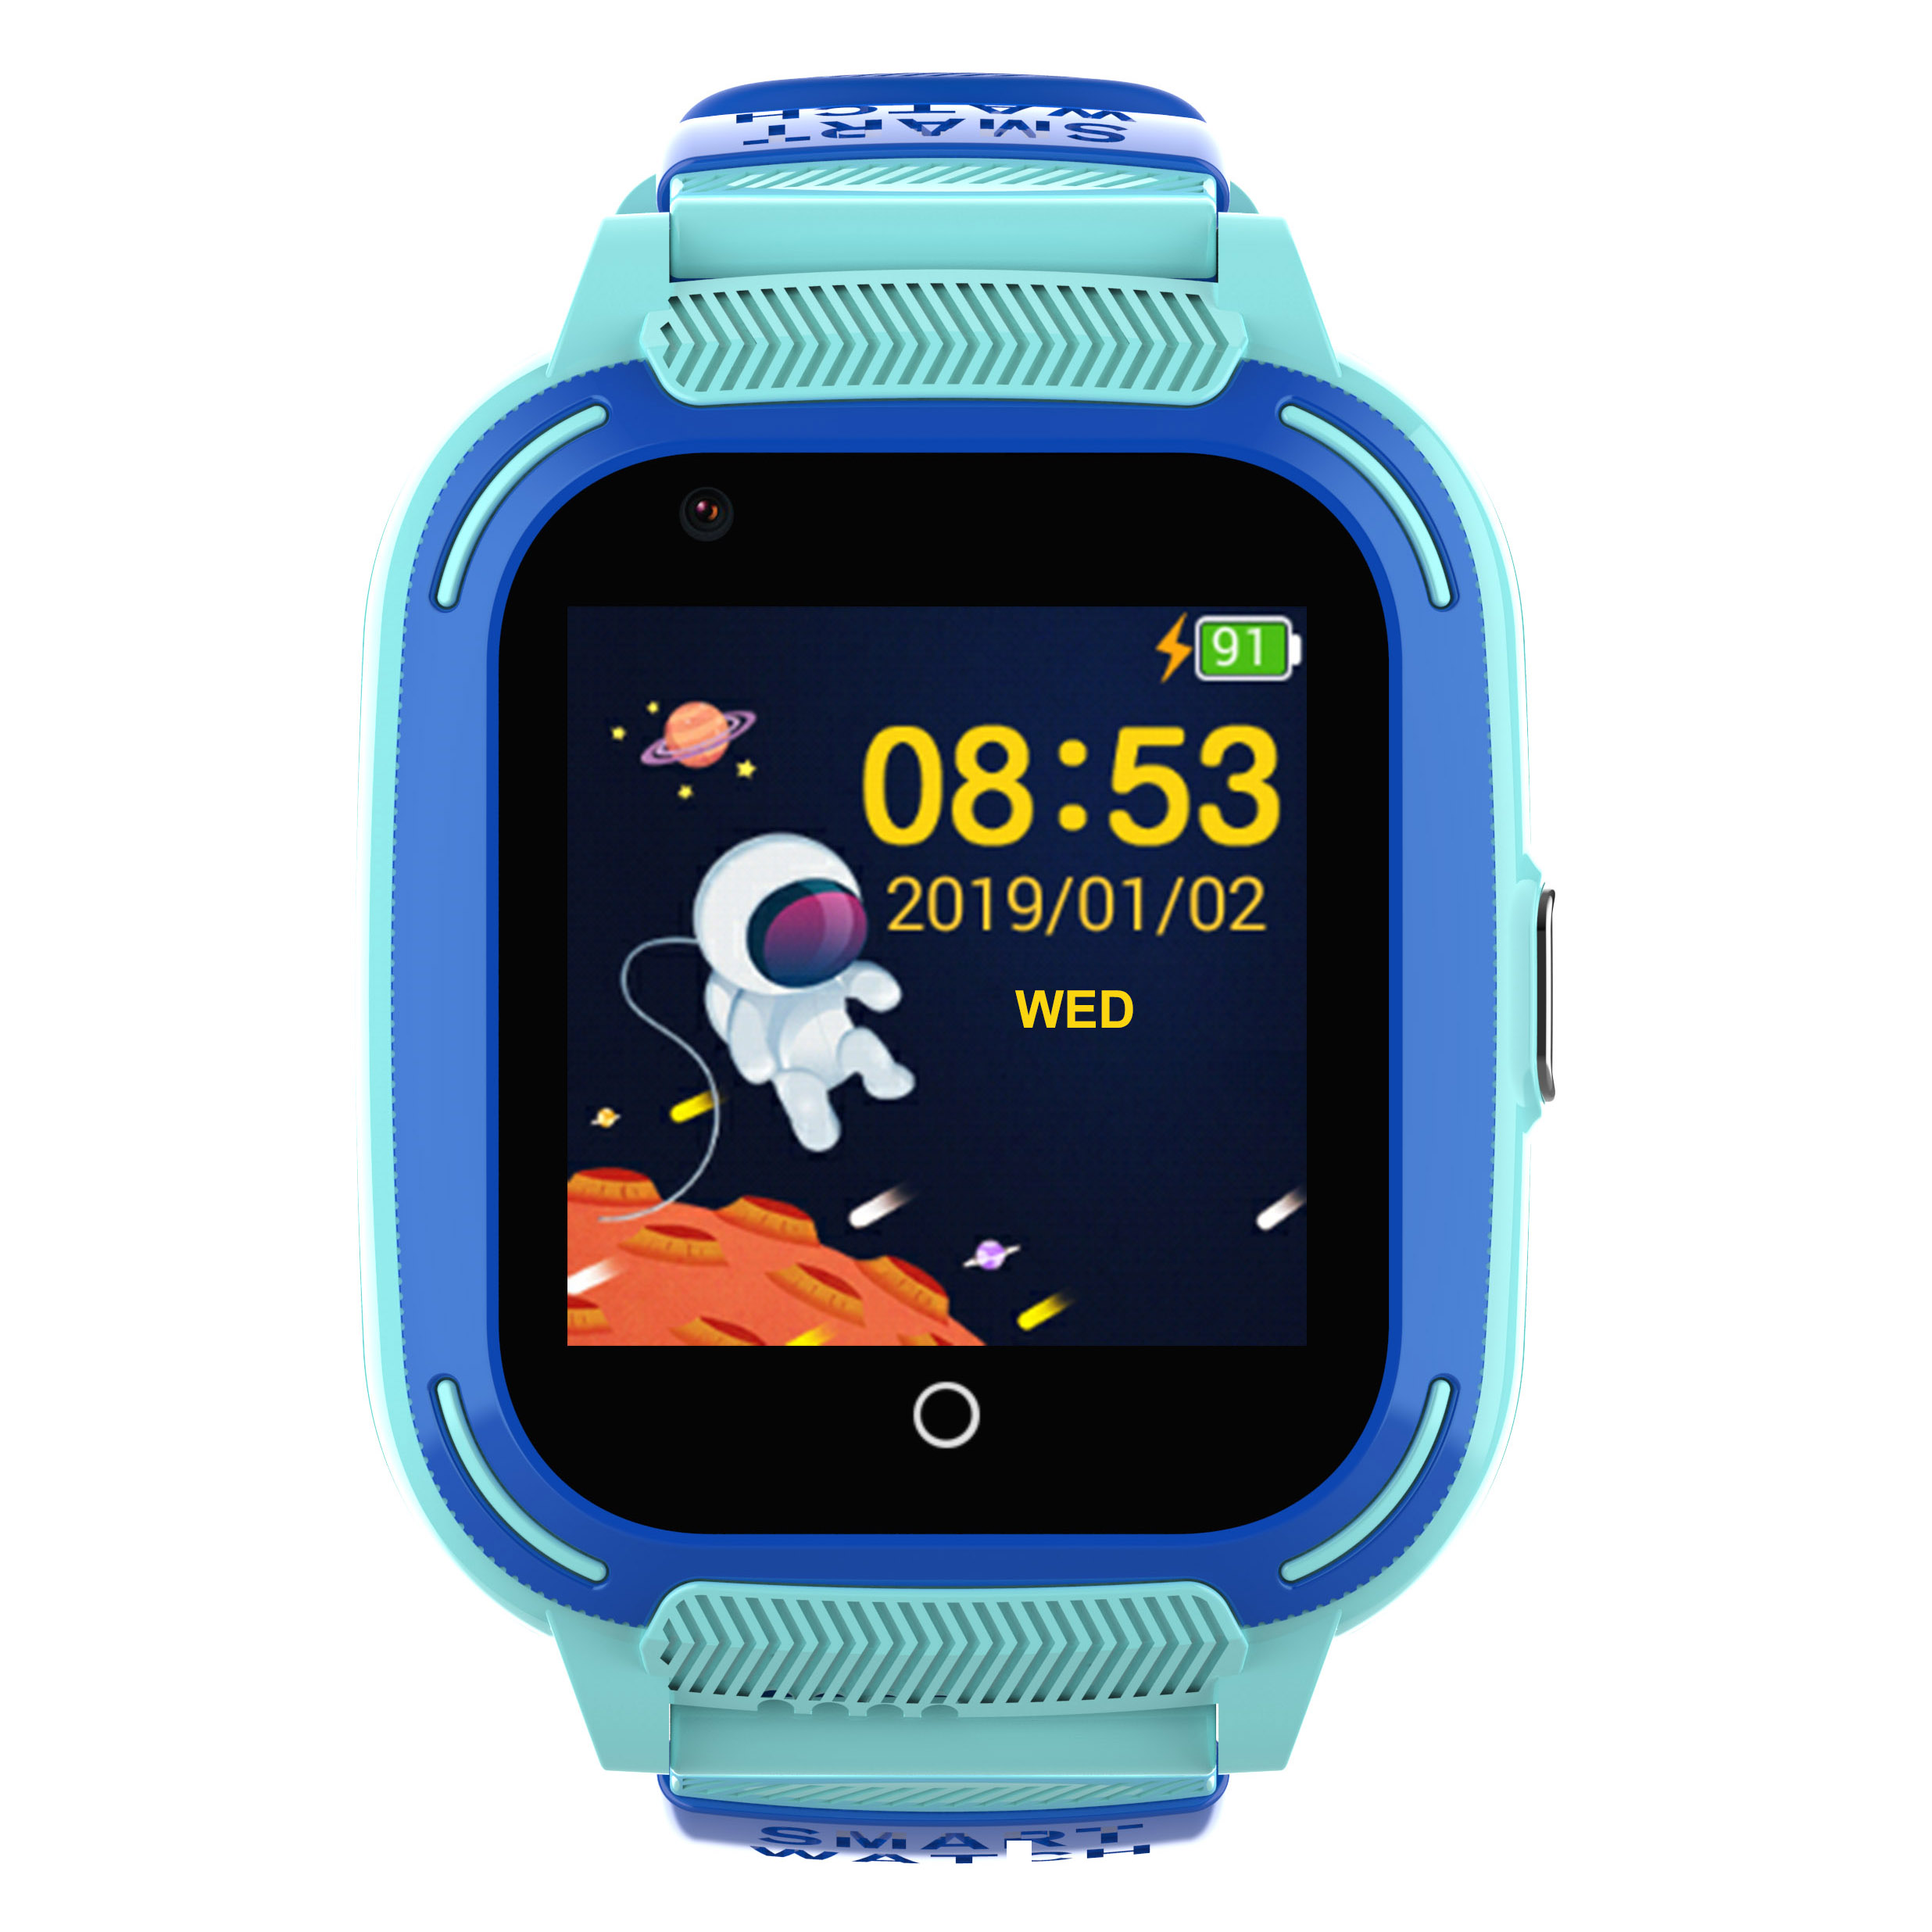 LTE IP67 Waterproof Smart Phone Watch GPS Tracker with Video Call D62